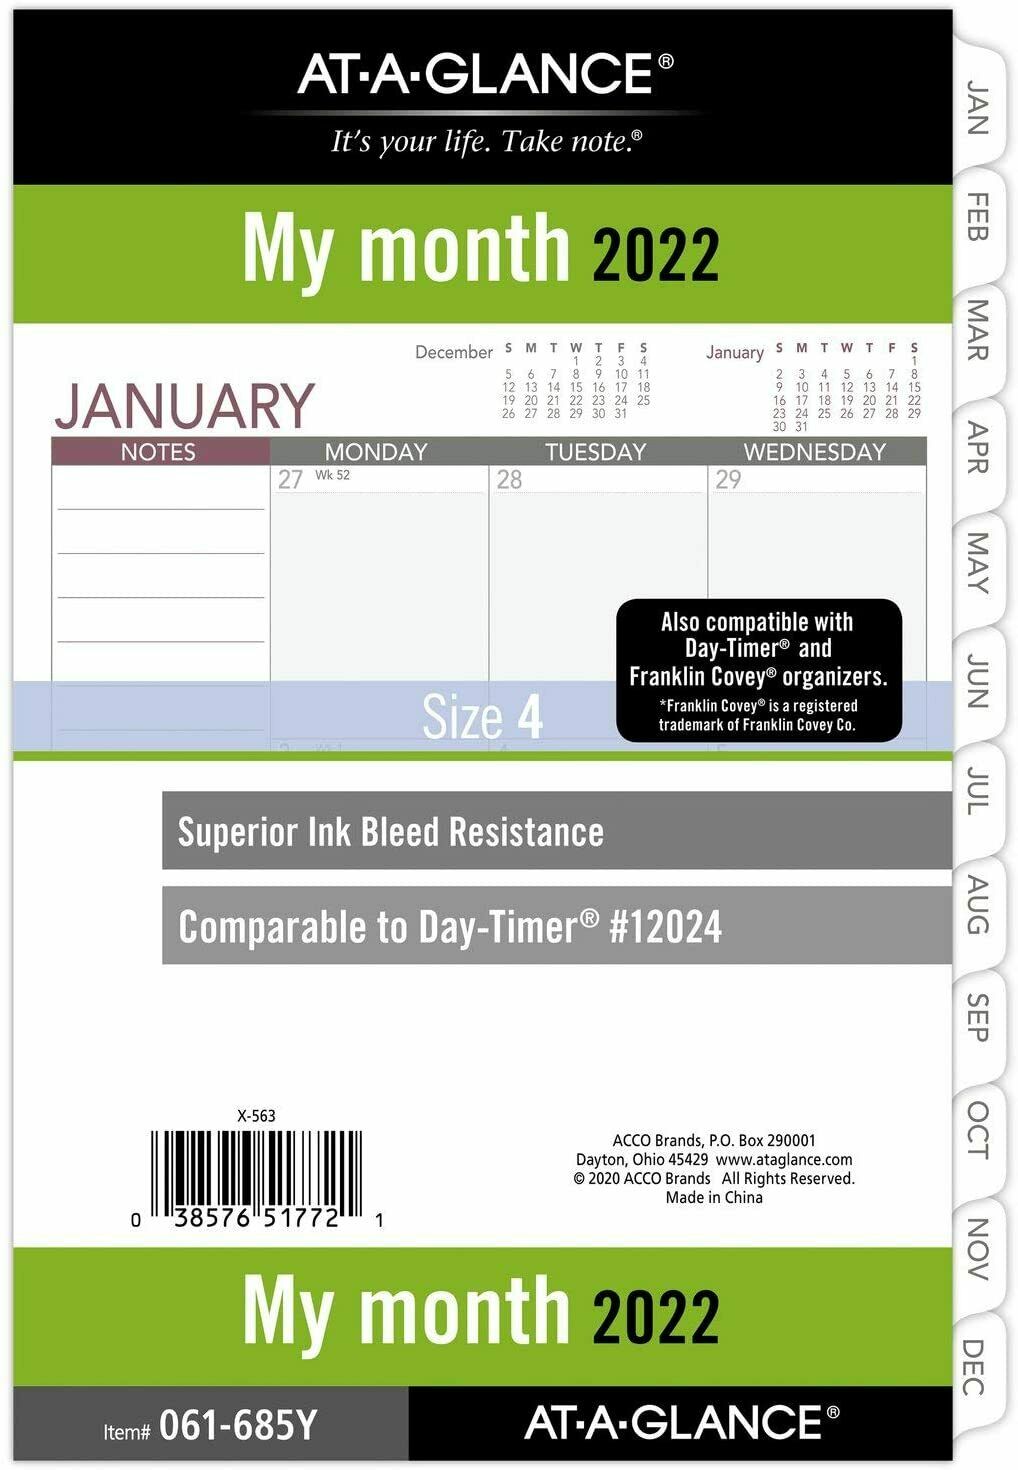 At-a-glance 2022 Monthly Planner Refill Size 4 (day-timer #12024) Item #061-685y